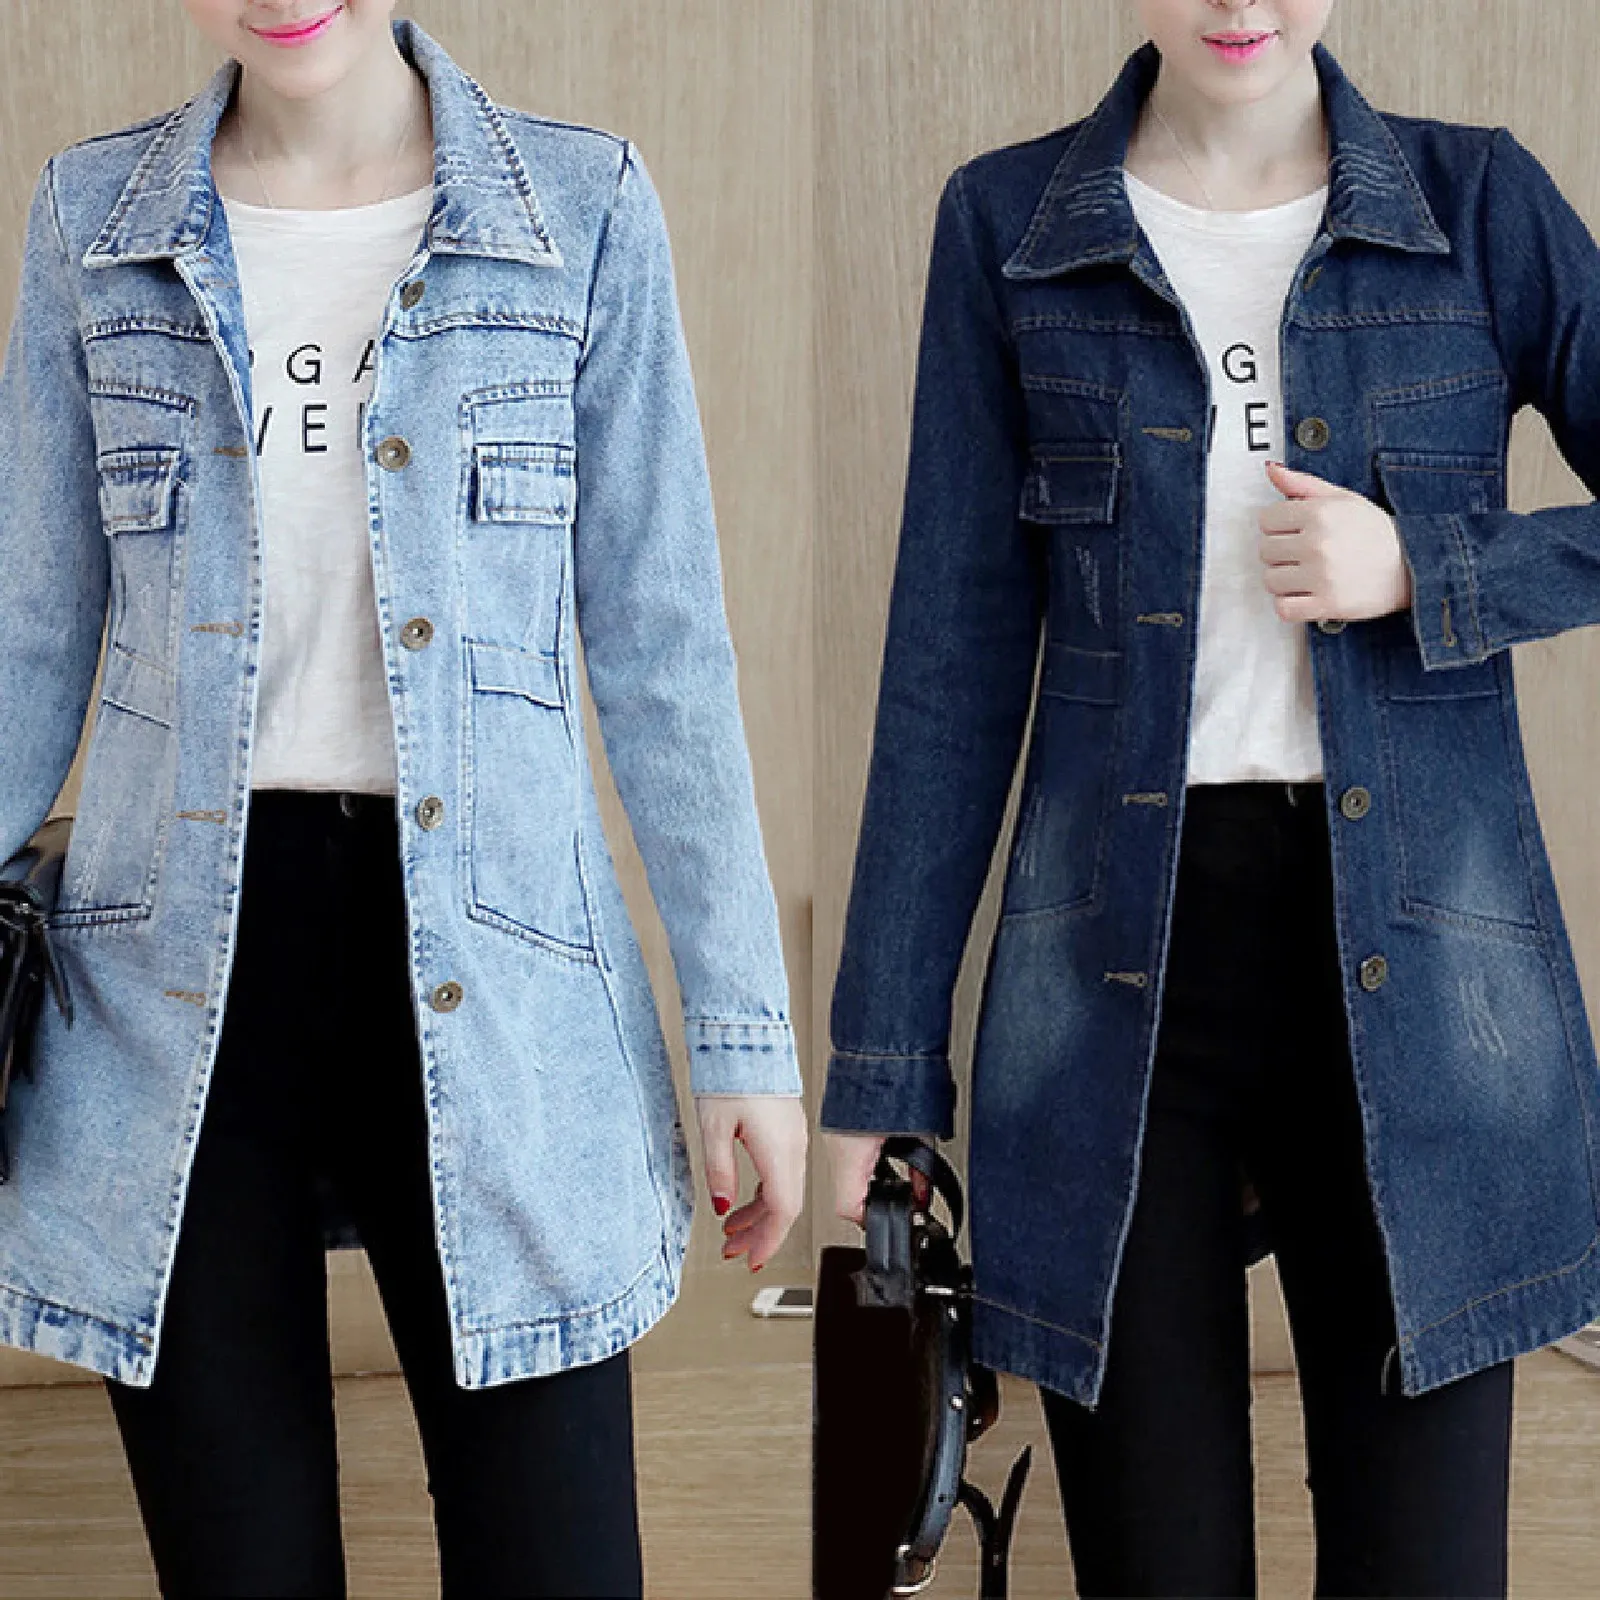 Trending Products Large Size Trench Coat Women Outerwear Denim Jacket Embroidery Autumn Clothing European Fashion 240229